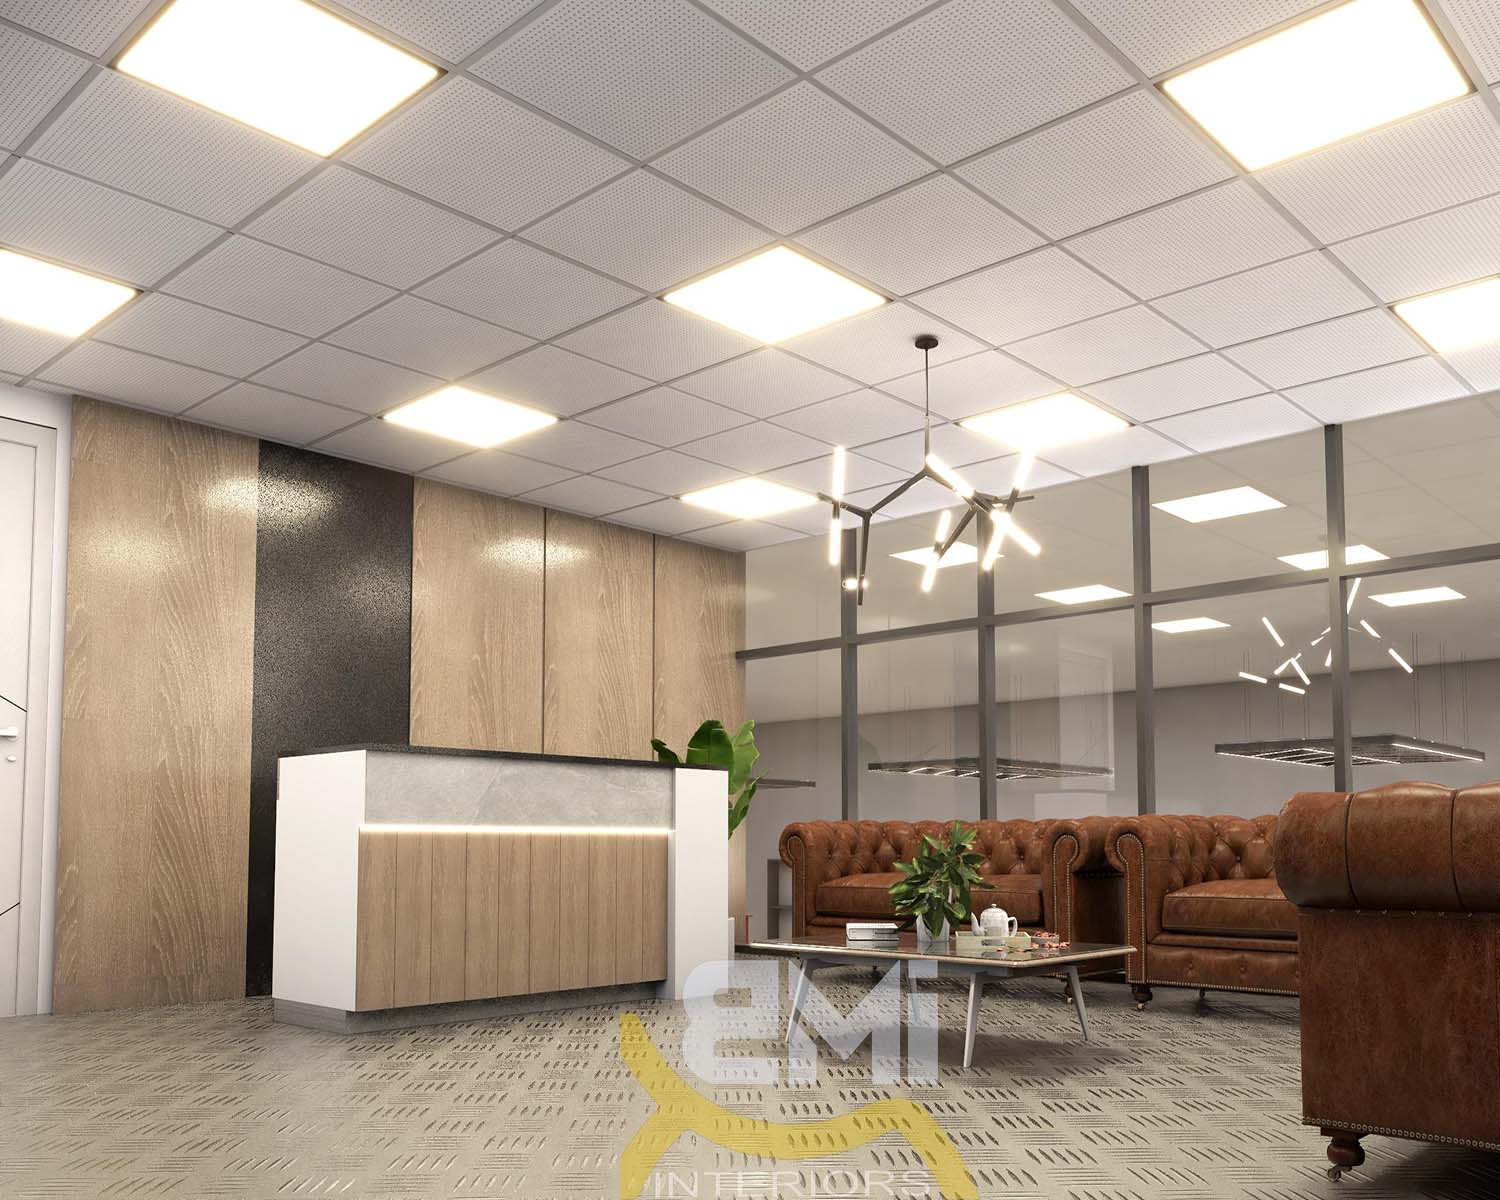 3d model of decored office design with 3 brown sofas placed near reception desk